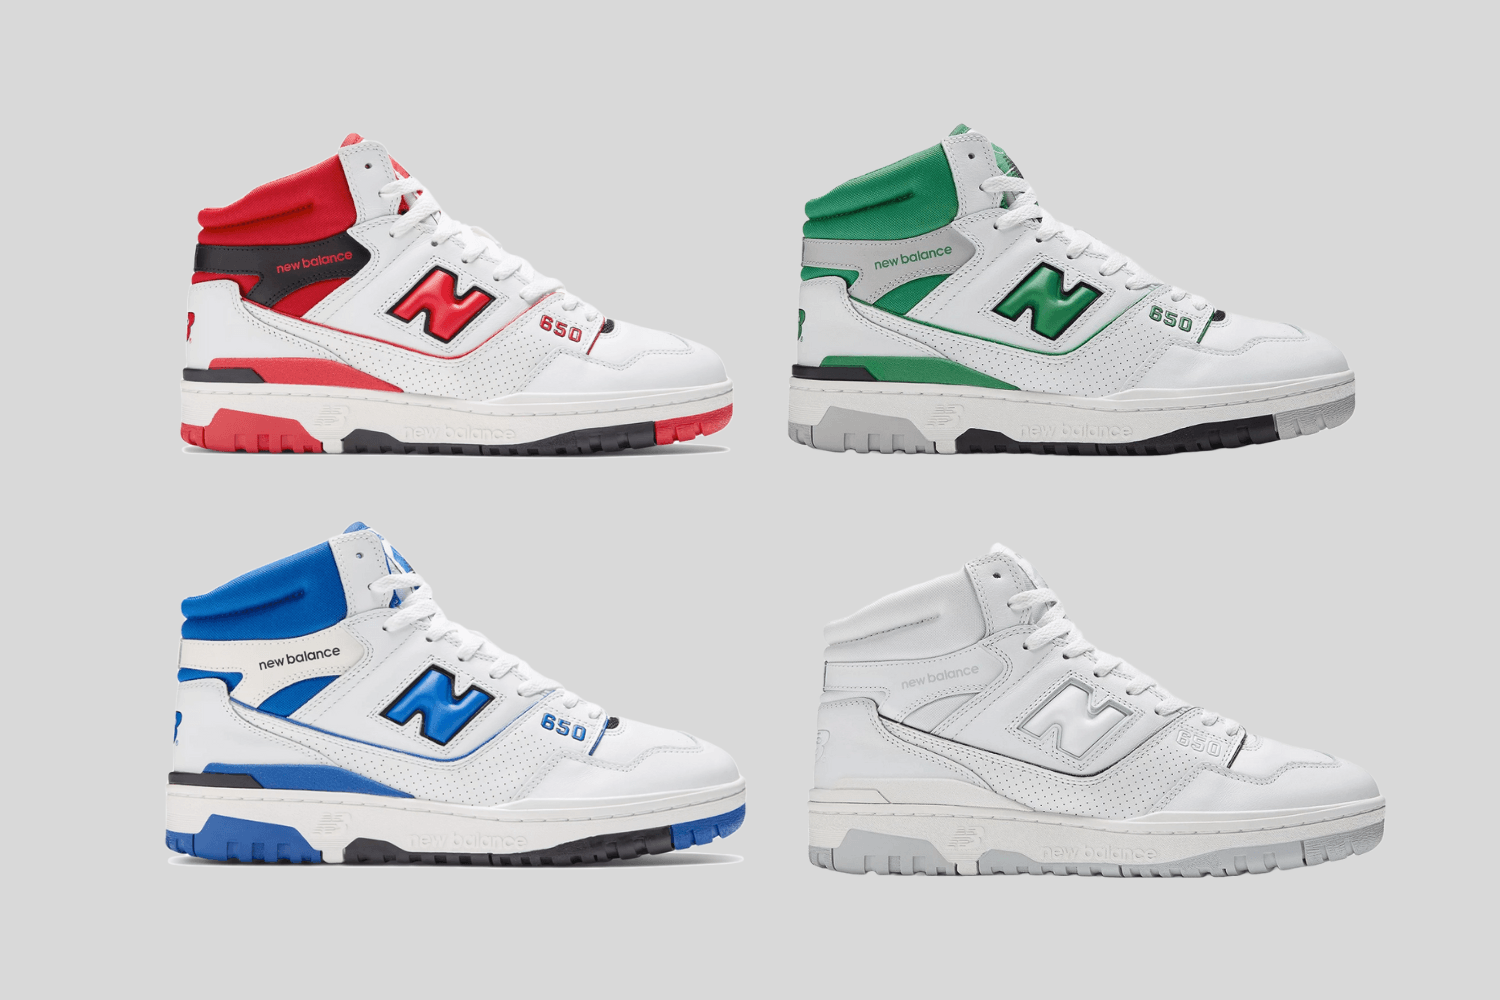 New Balance 650 comes in four new colorways